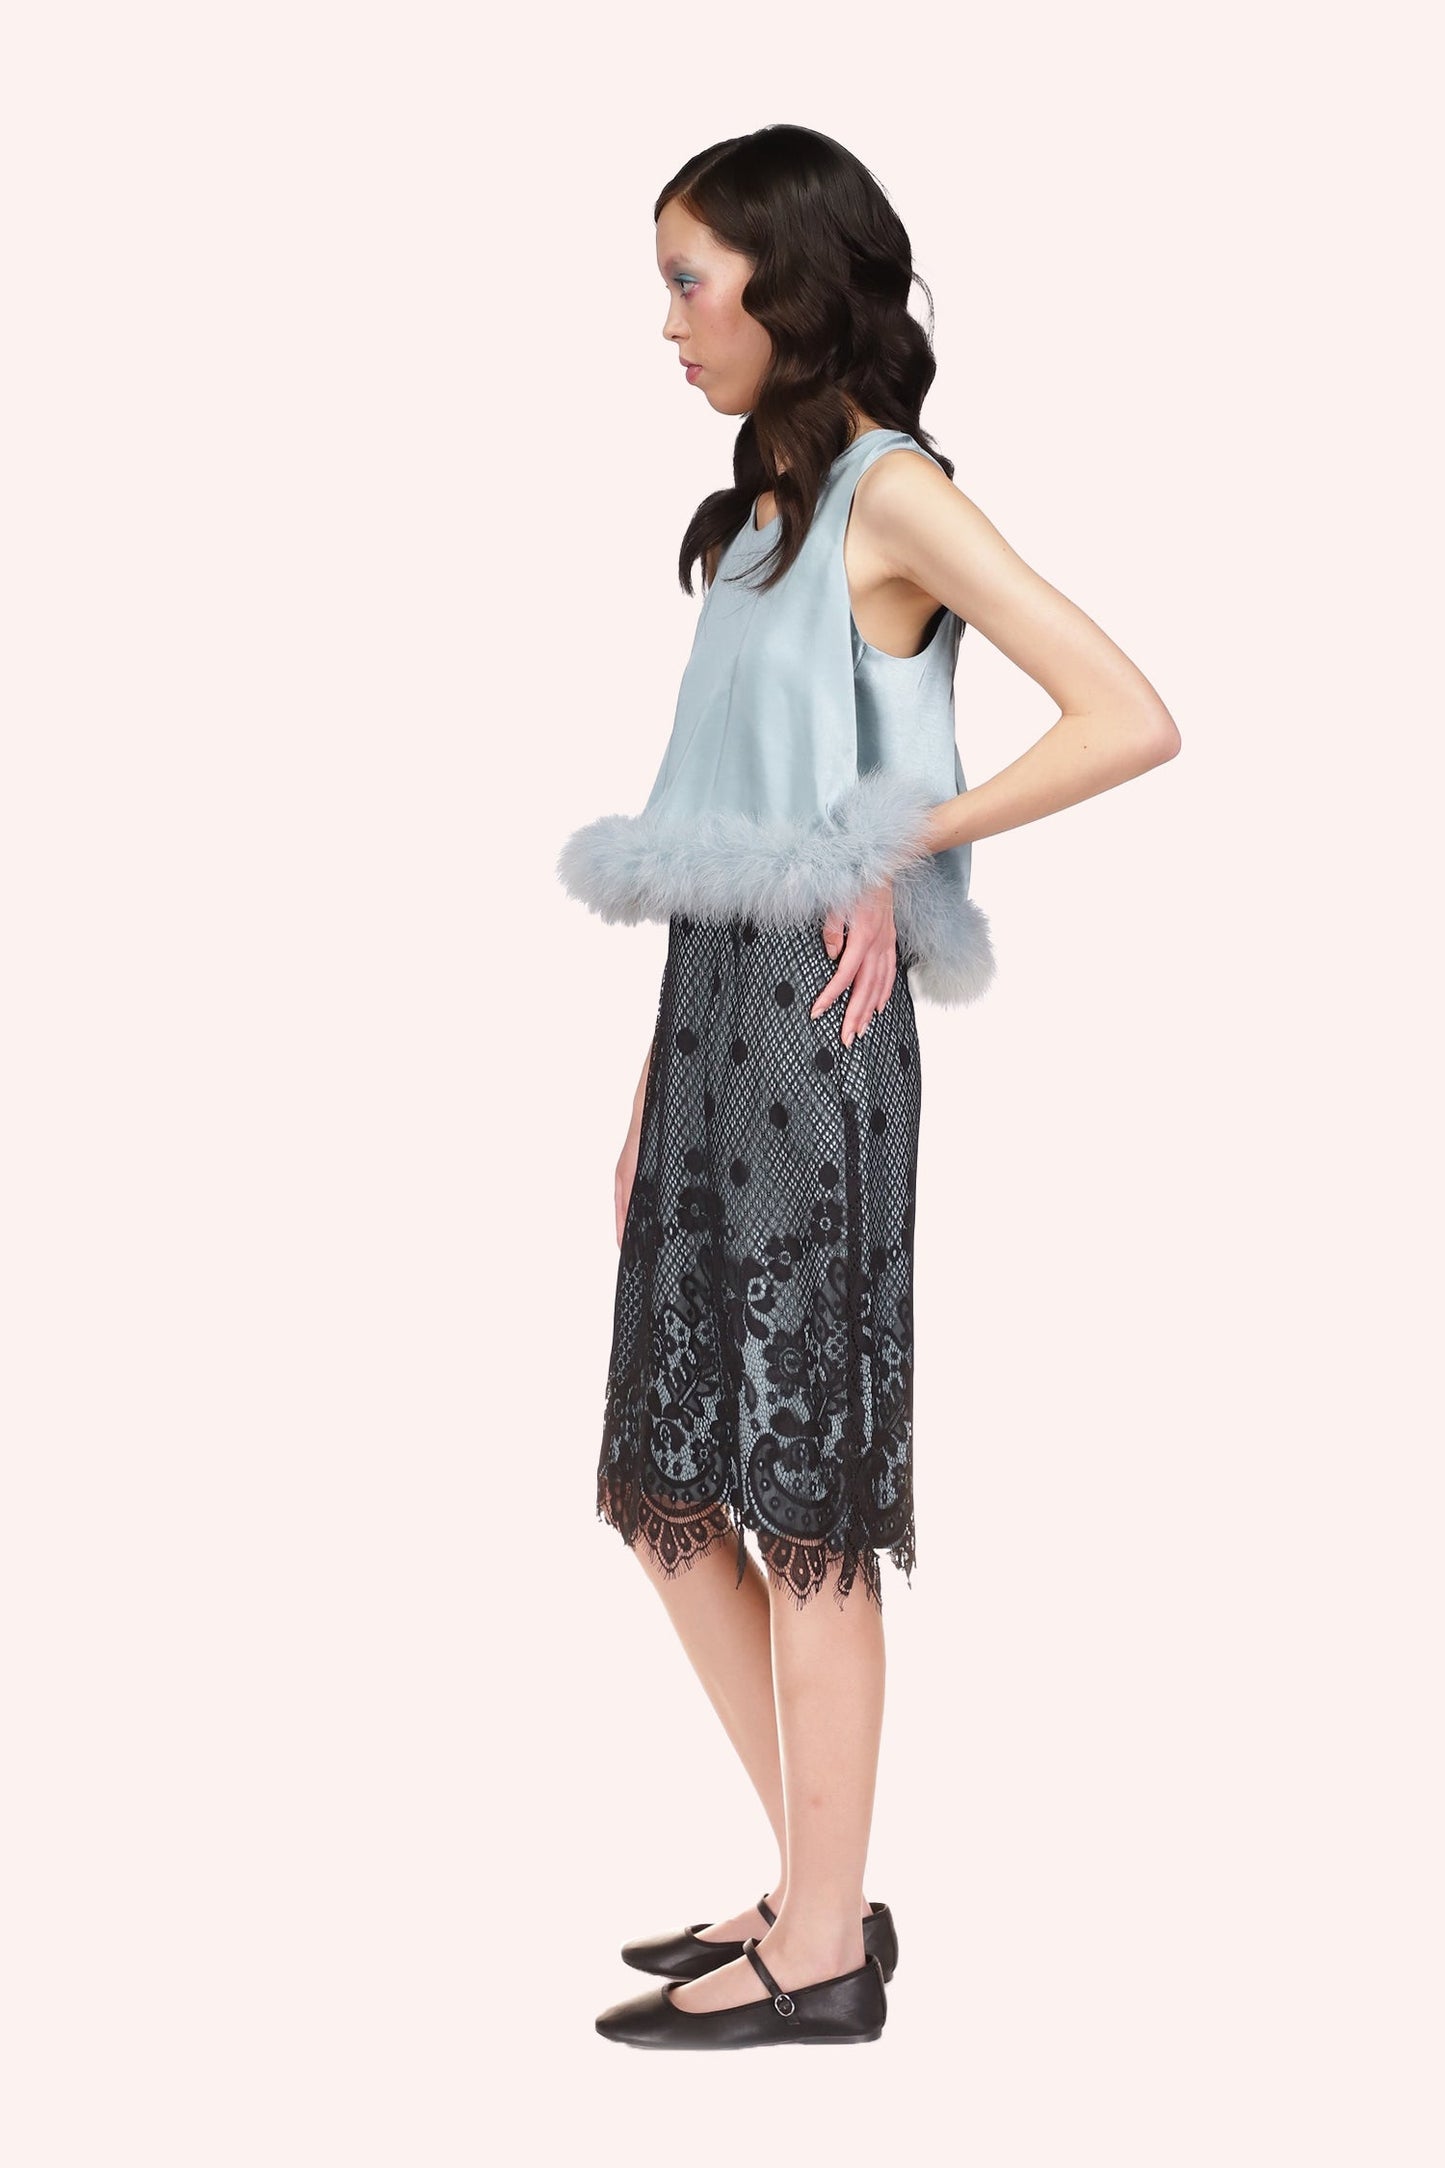 Washed Dusty Blue Satin with Lace Top Trimmed with Marabou Feather at waistline, ruffle effect.